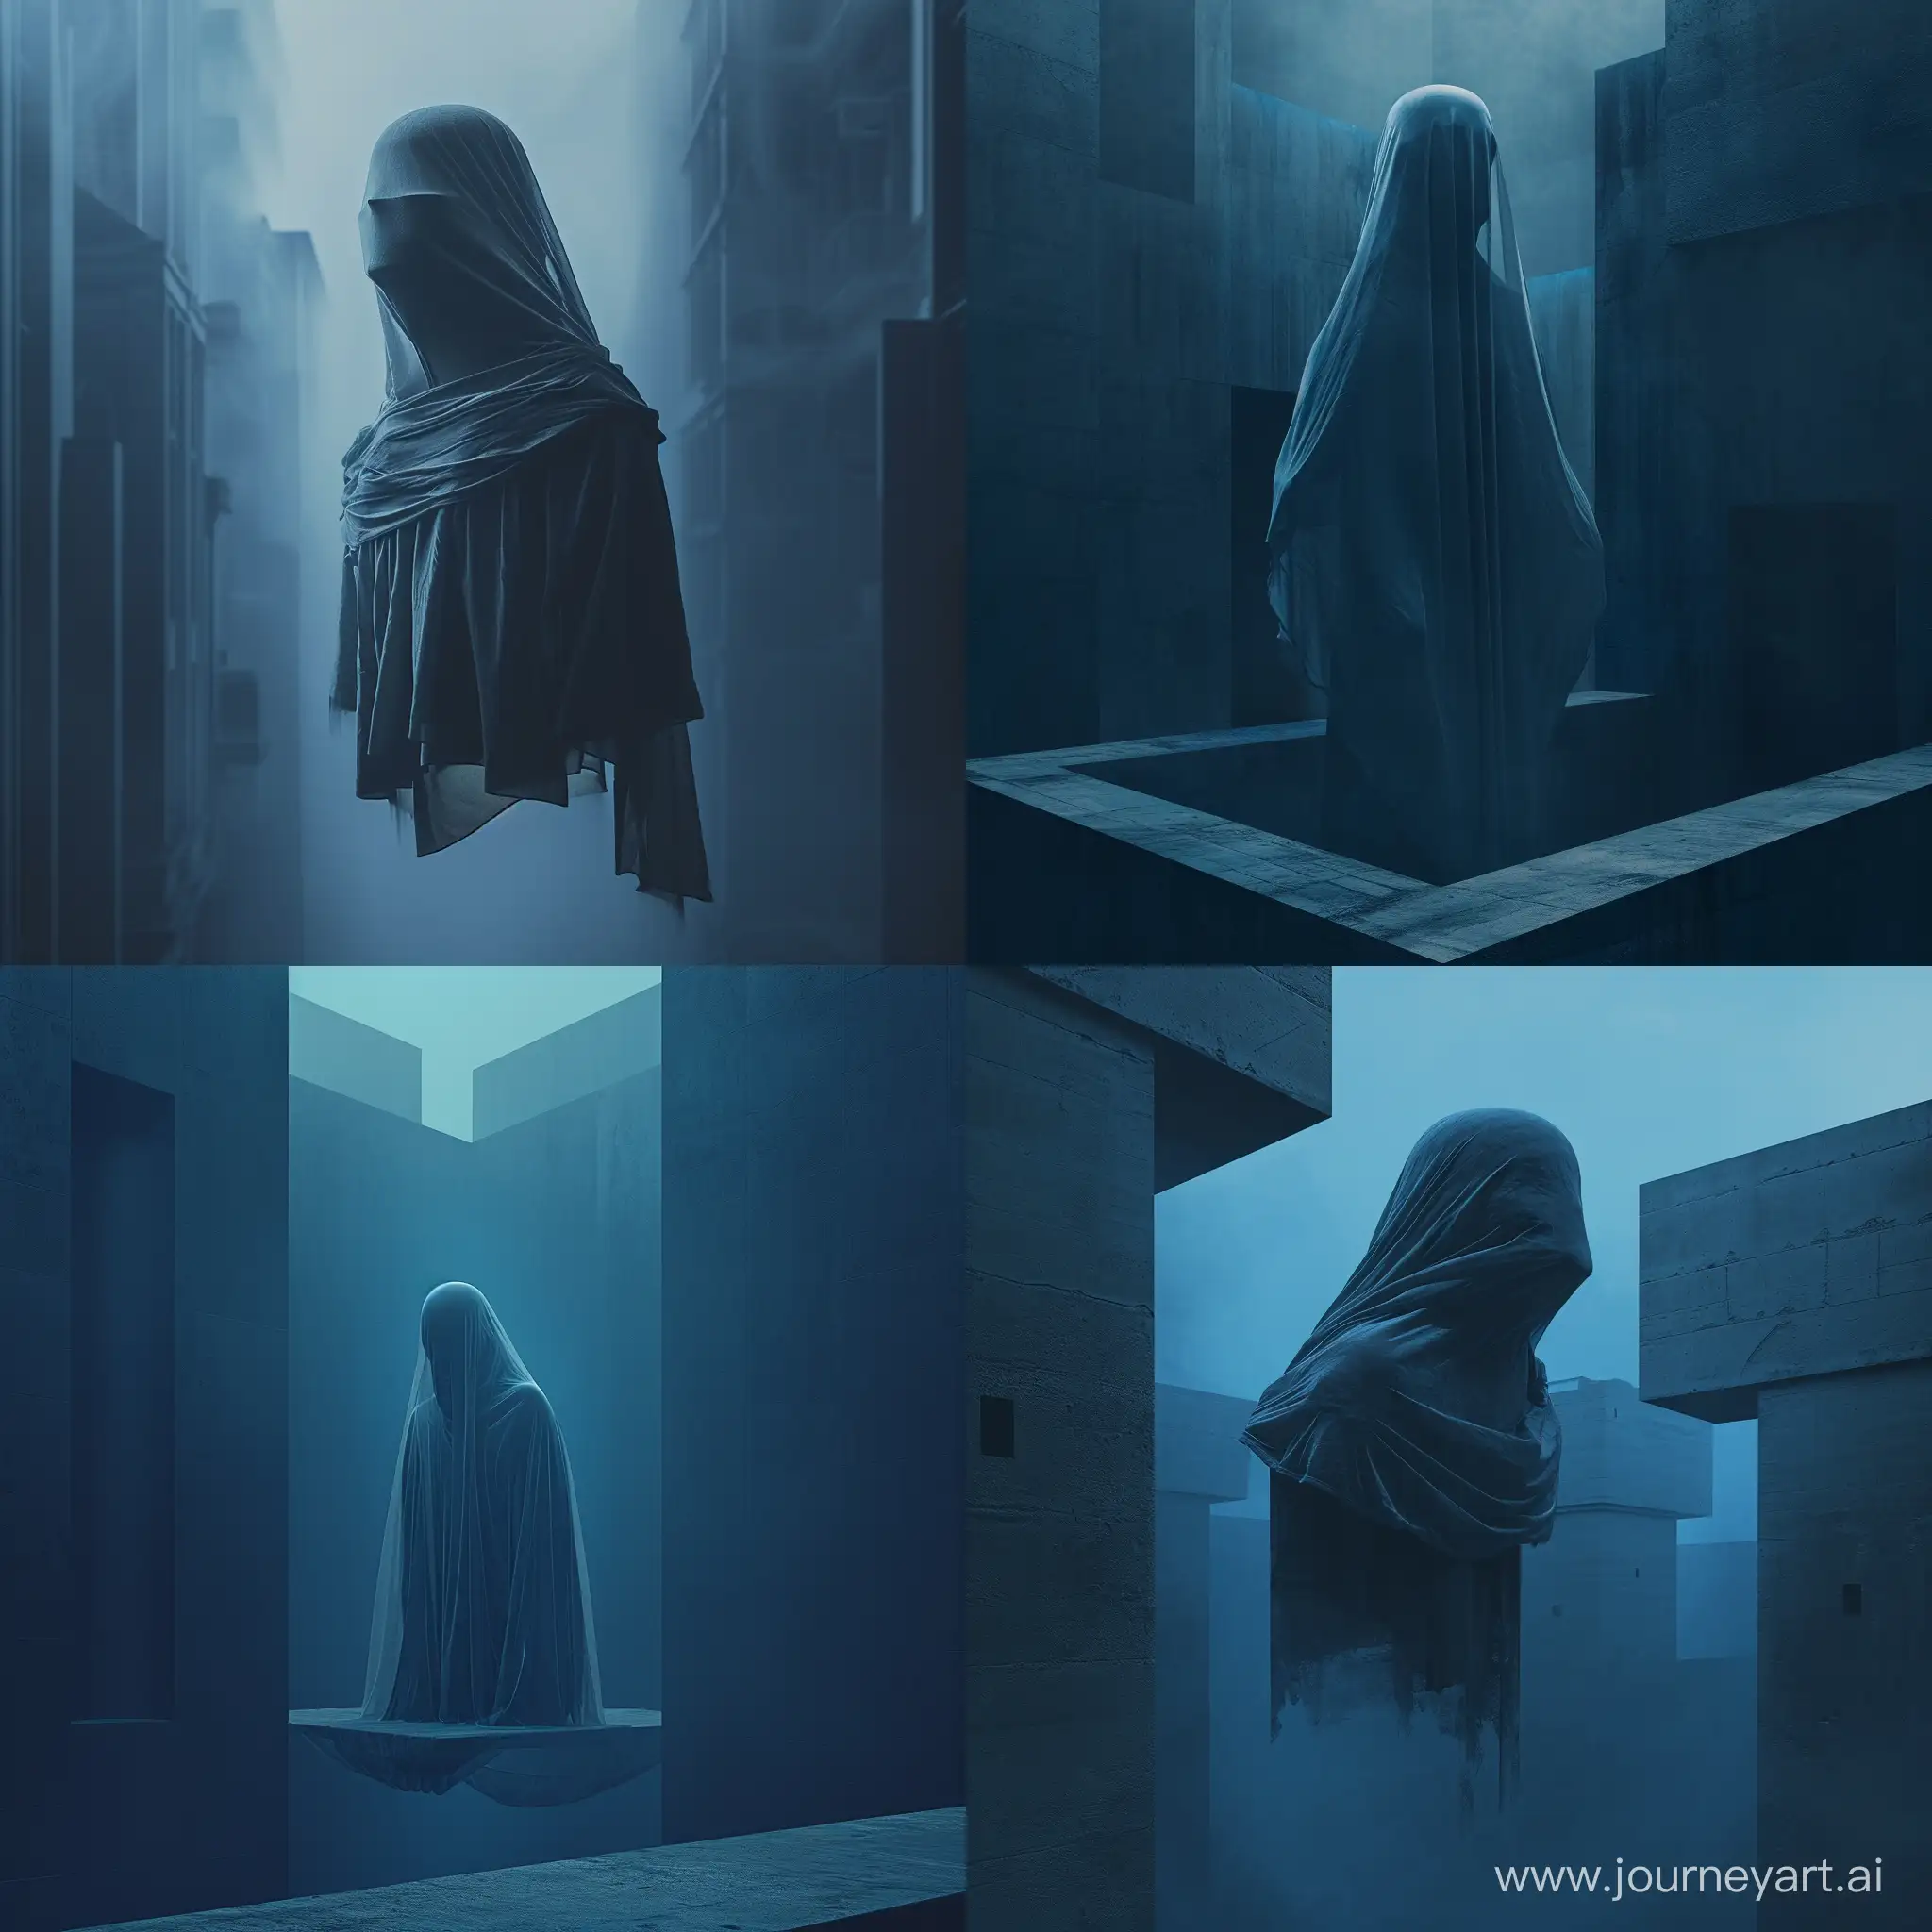 a levitating person with a veil covering, minimal architecture, dark blue color, dystopian